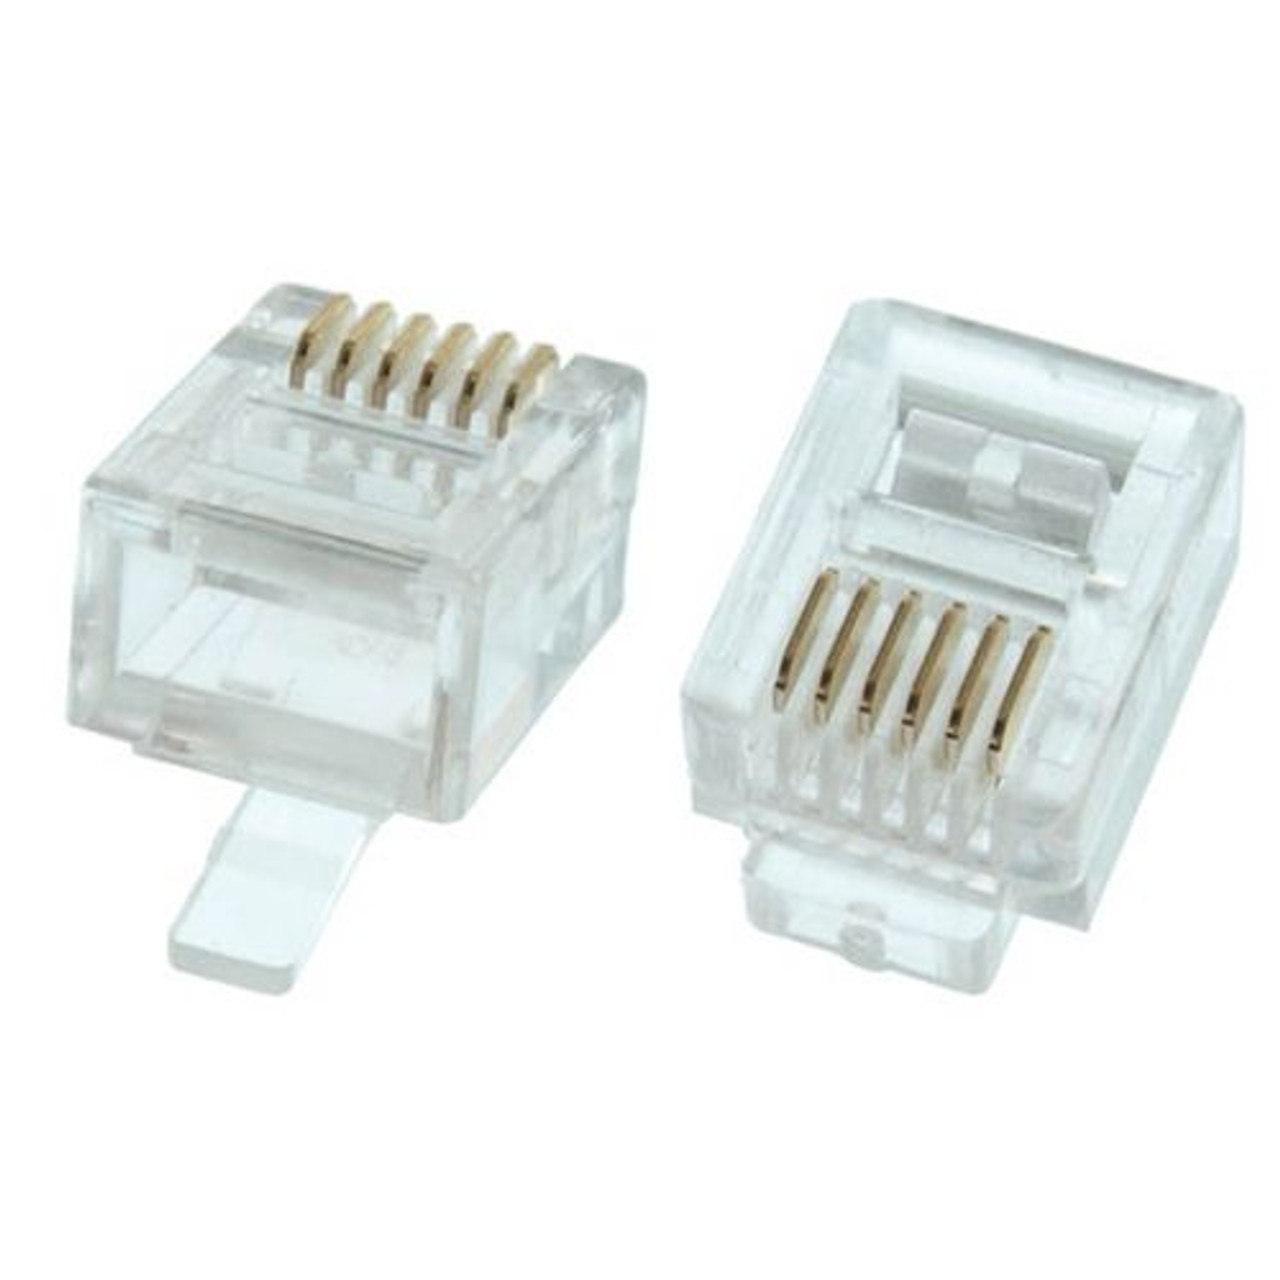 Eagle RJ12 Plug Connector 25 Pack Modular Stranded Flat Round 6P6C Telephone 6 Pin RJ-12 Conductor Audio Data Signal Snap-In Phone with Gold Contacts, Contractor Grade